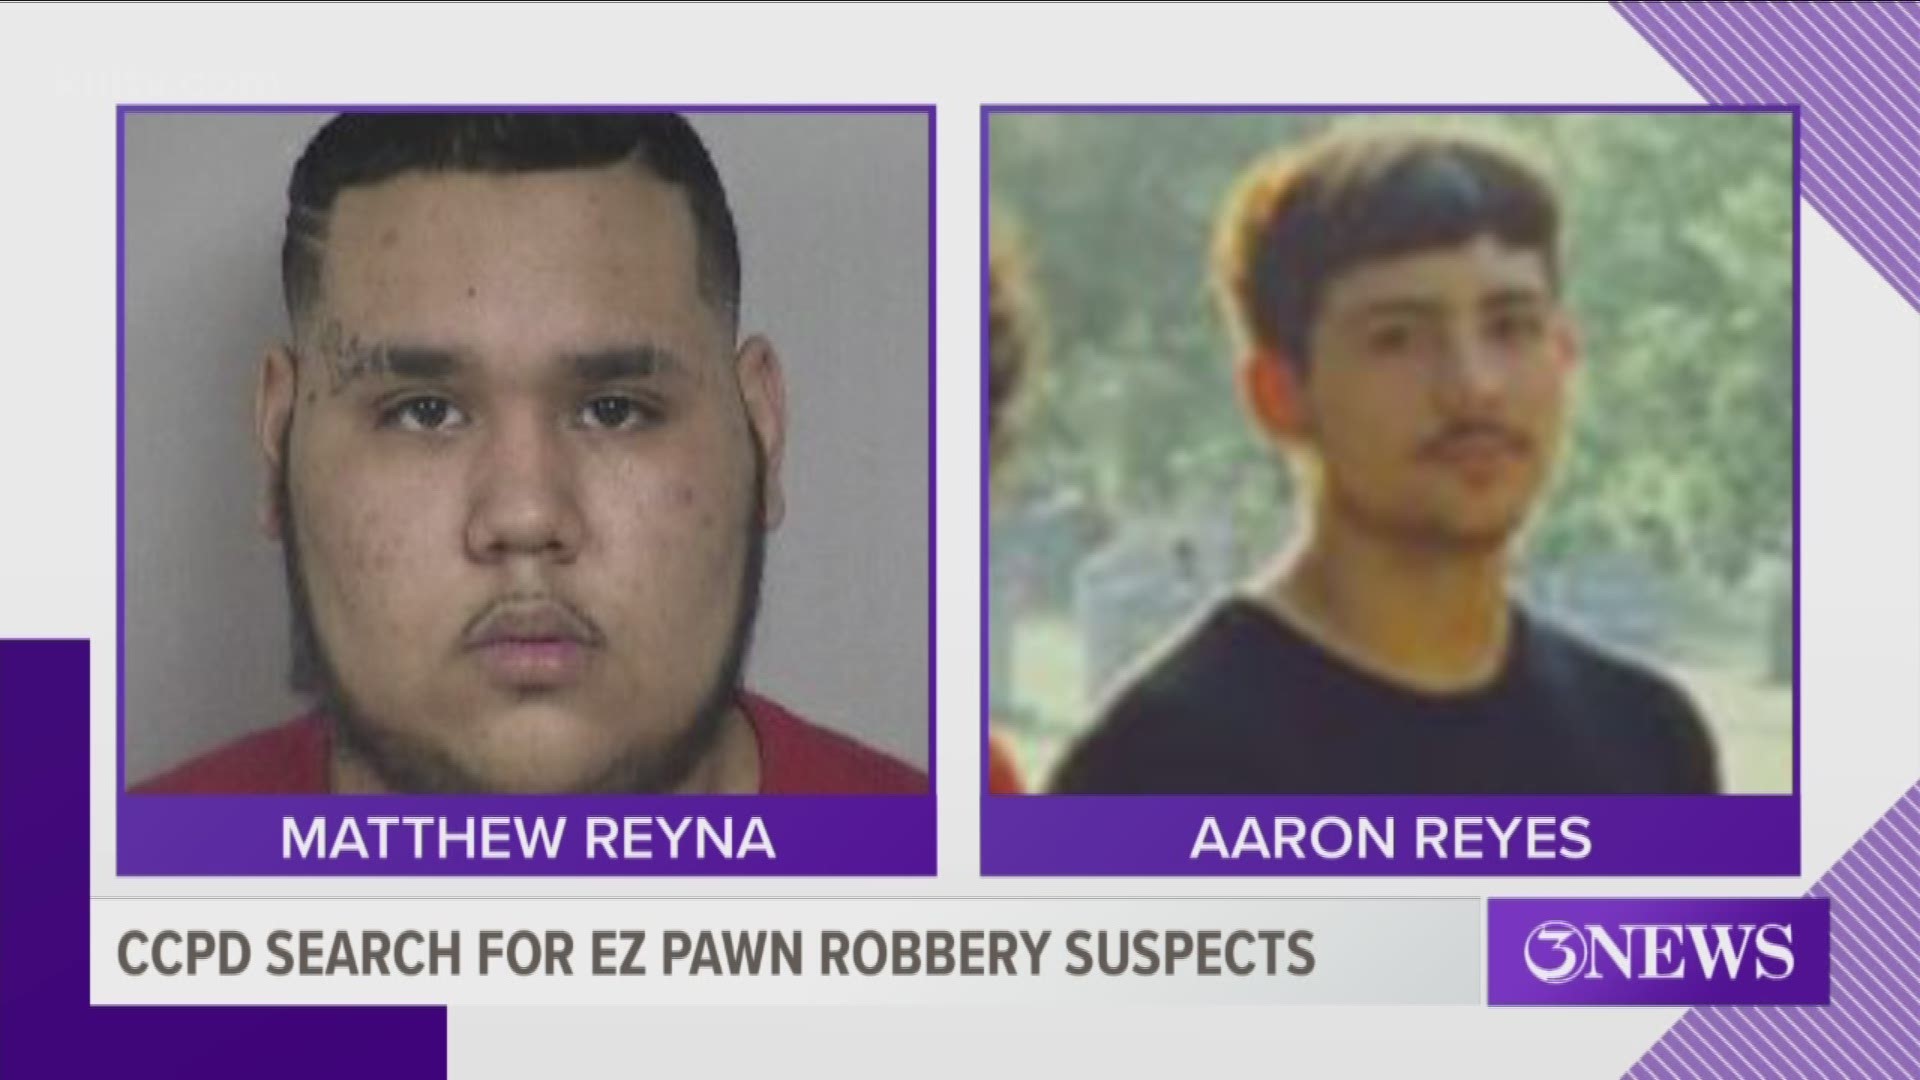 The Corpus Christi Police Department is looking for information that can help them find 20-year-old Matthew Reyna and 17-year-old Aaron Reyes.